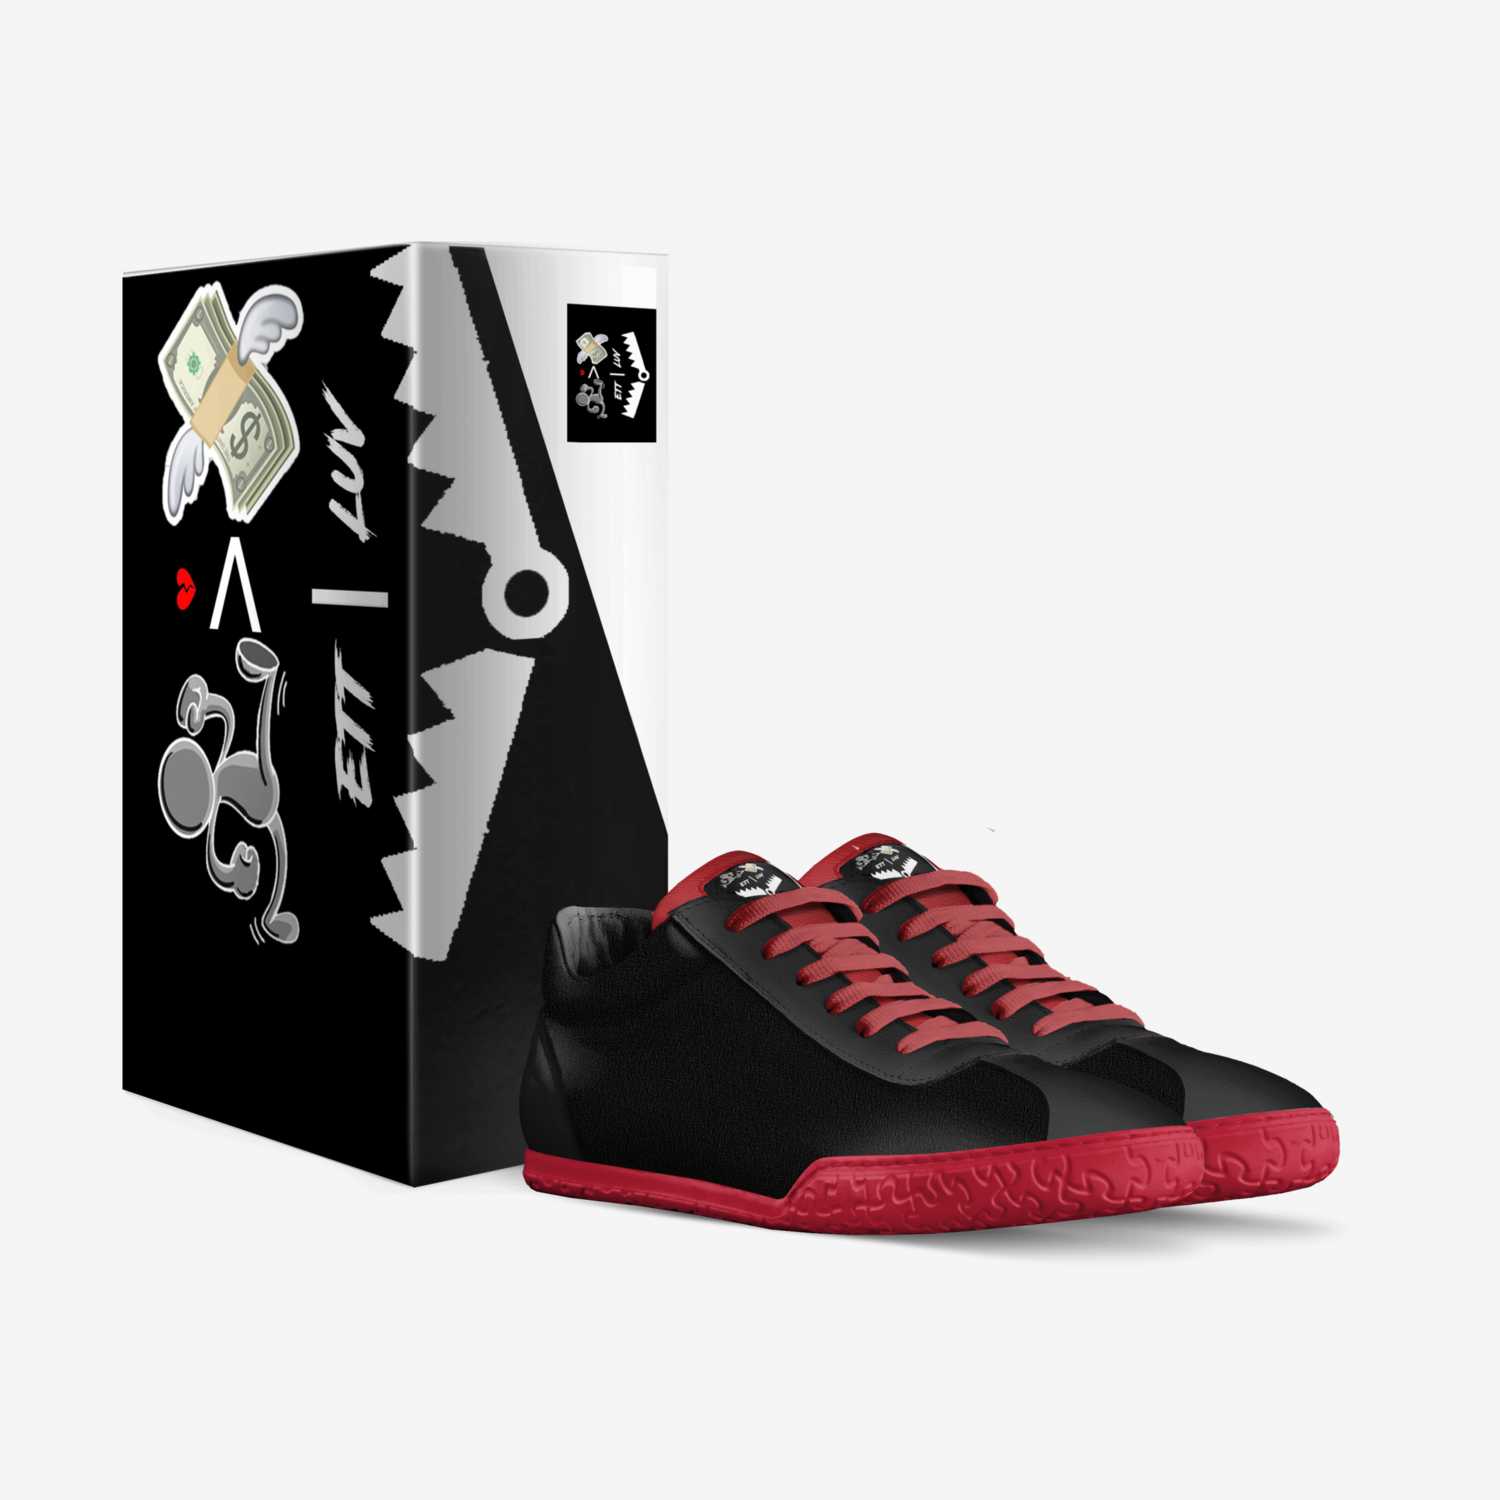 Hustleovertrap custom made in Italy shoes by Tione Nance | Box view